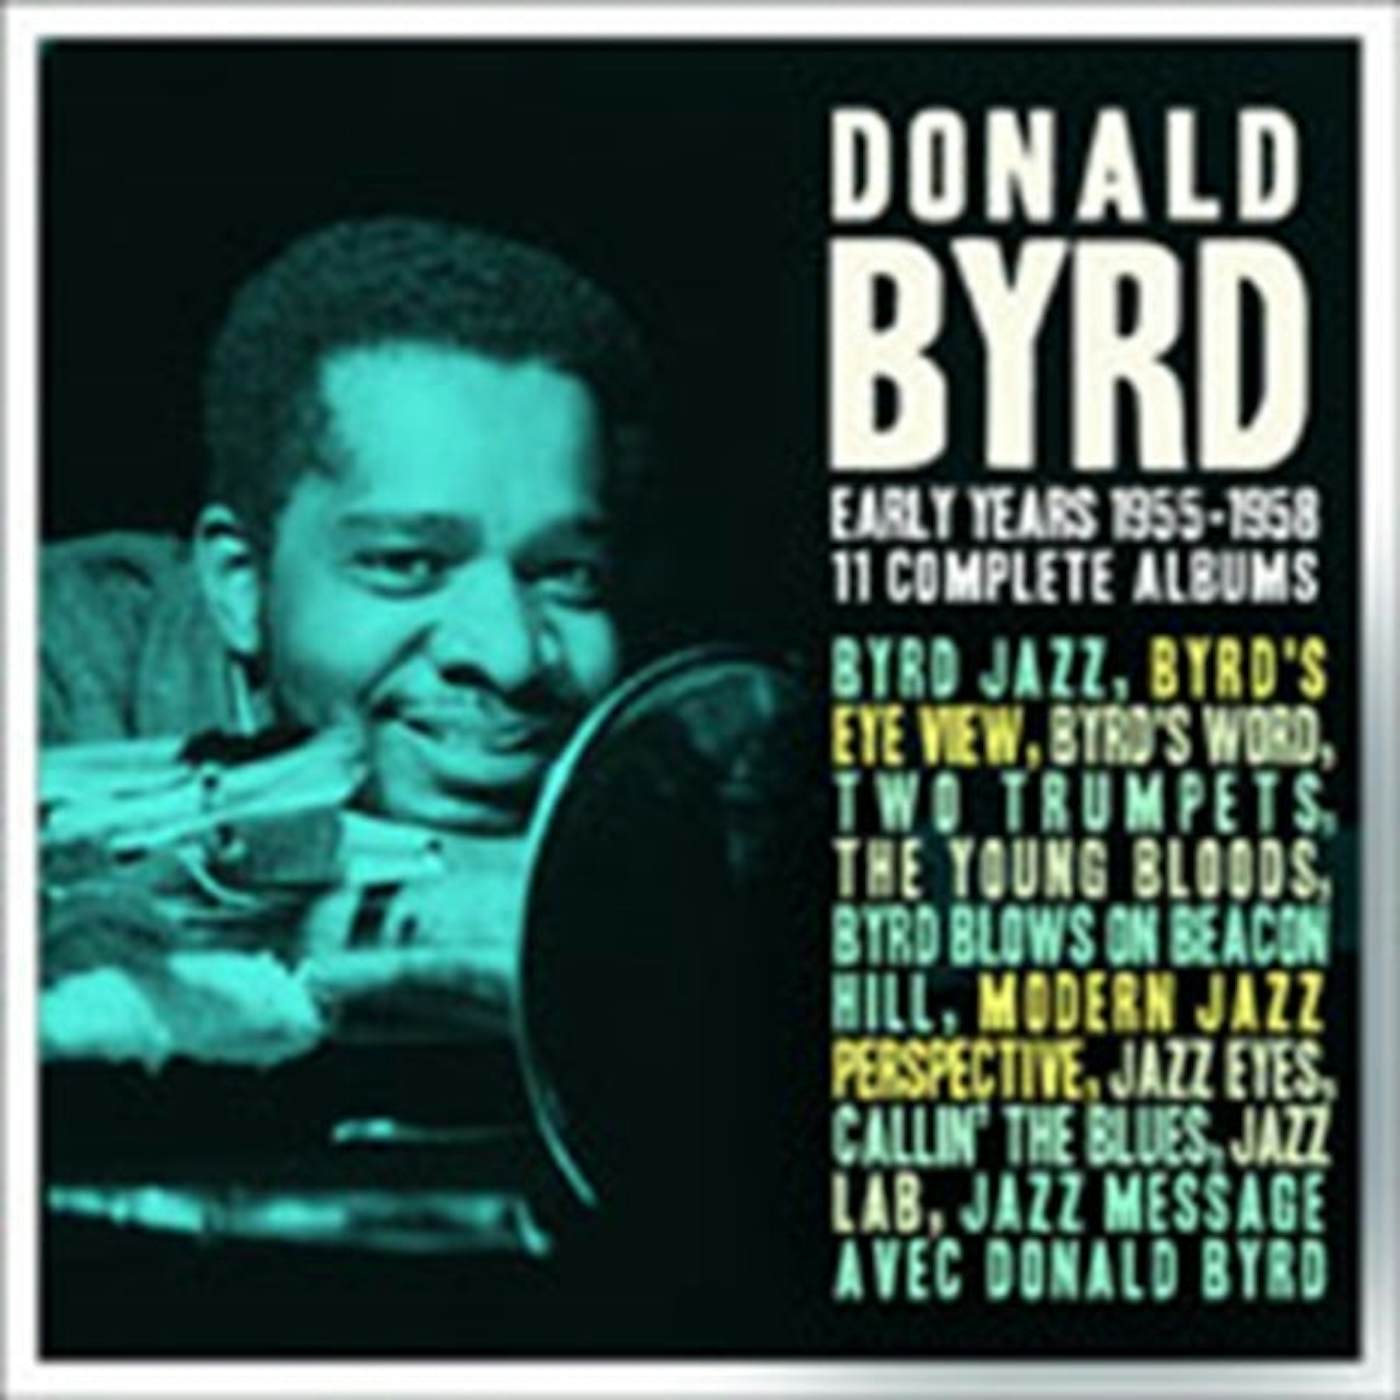 Donald Byrd CD - The Early Years: 1955 - 1958 (6cd Box)